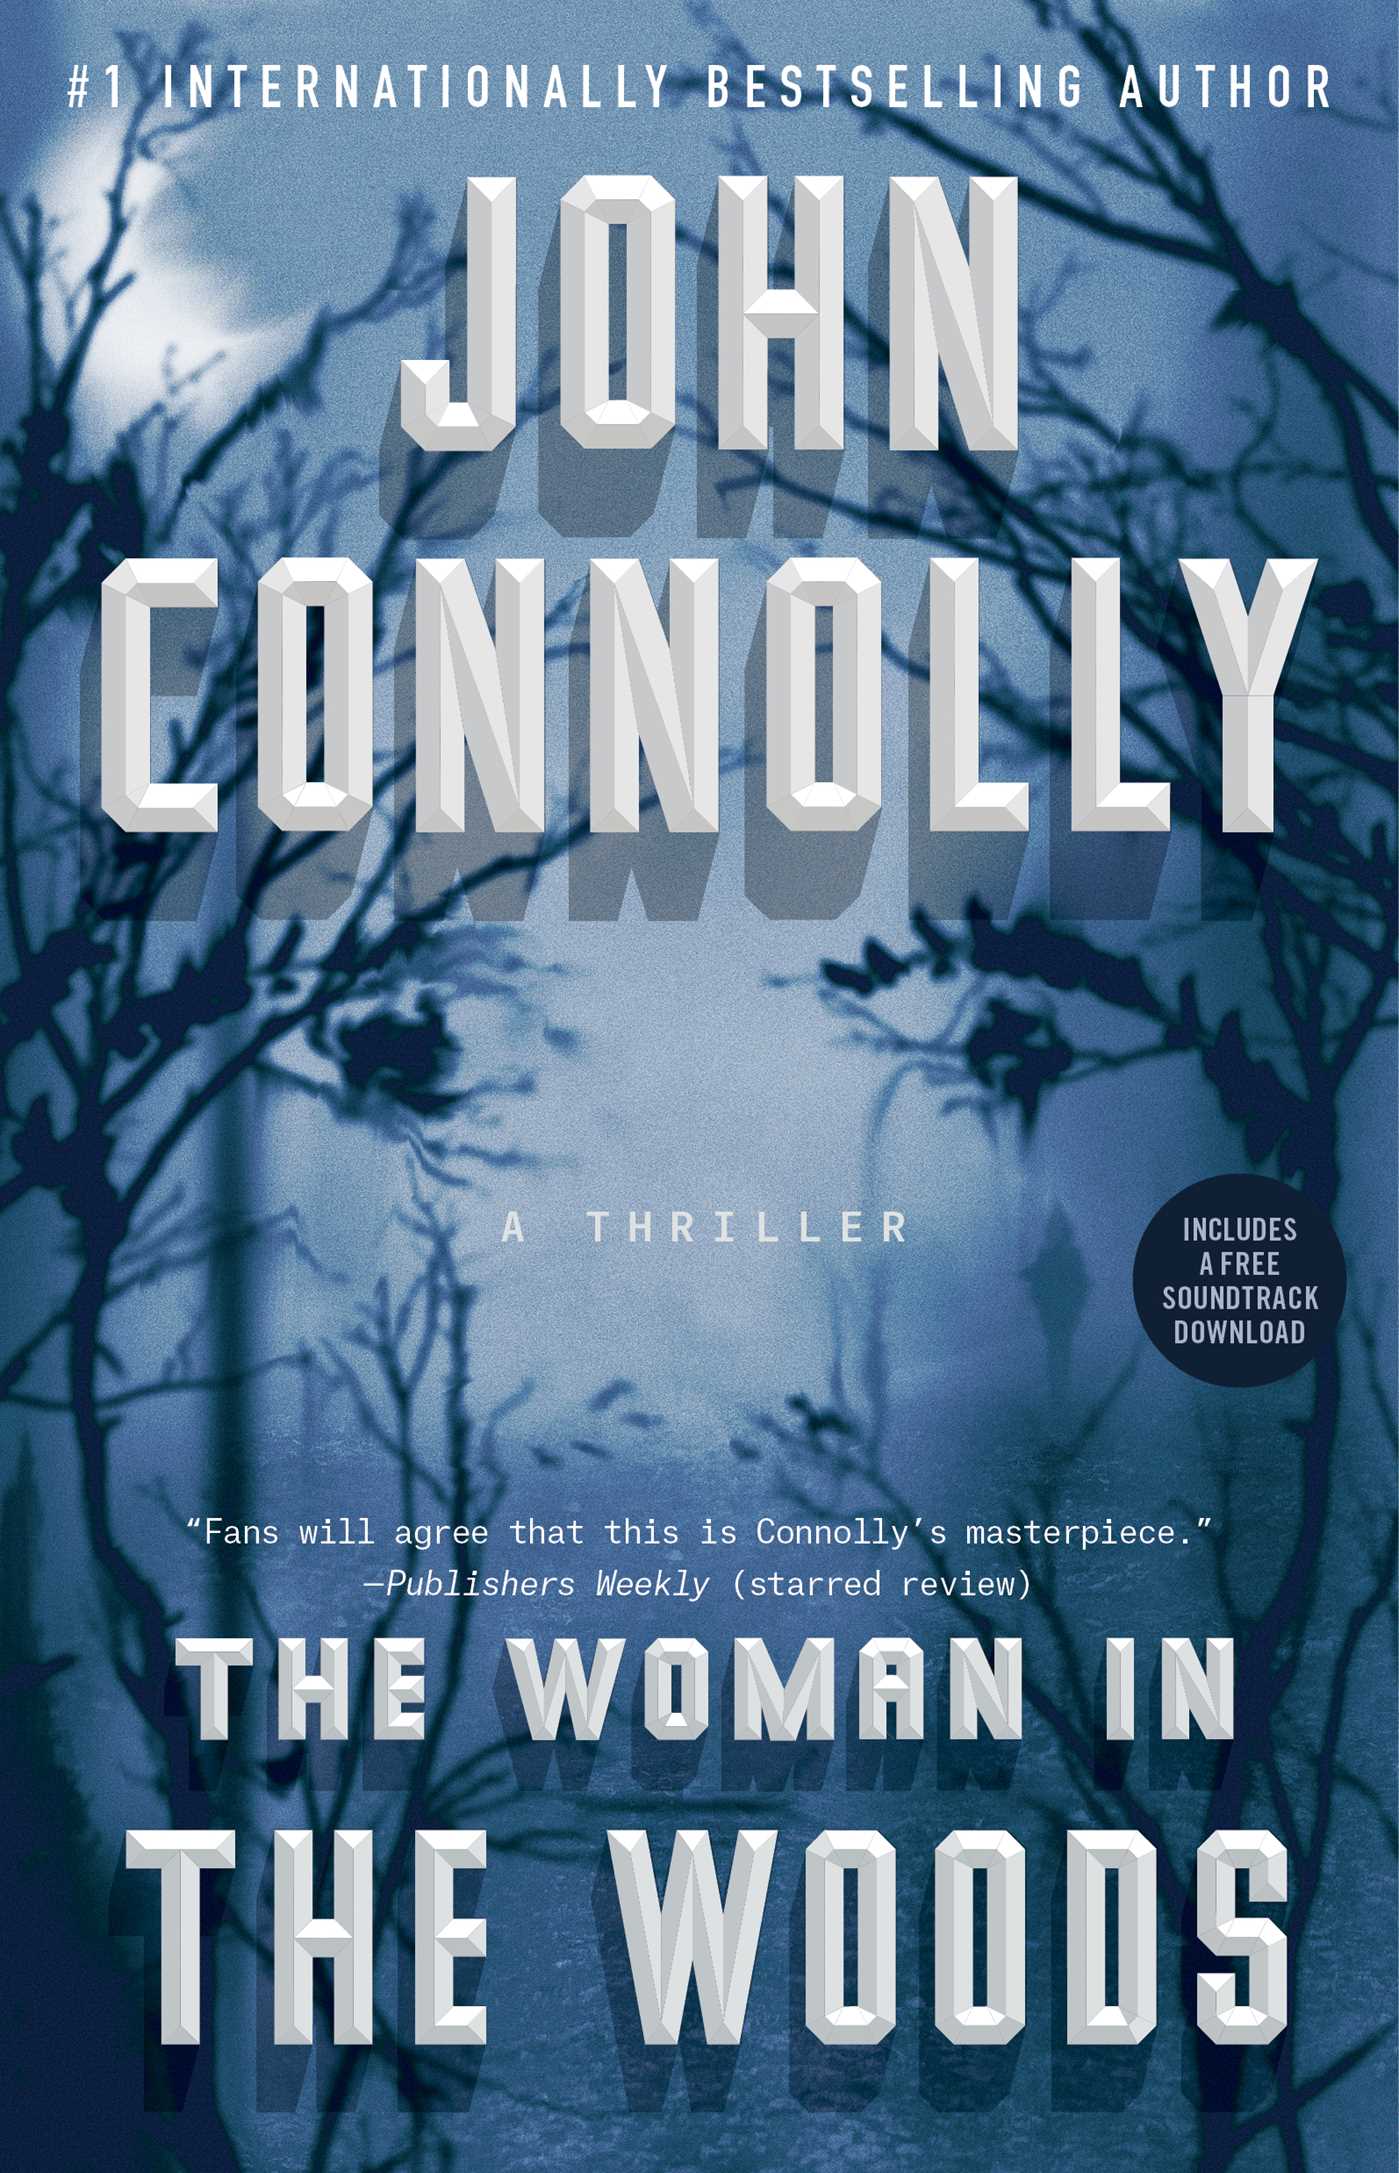 Image de couverture de The Woman in the Woods [electronic resource] : A Thriller